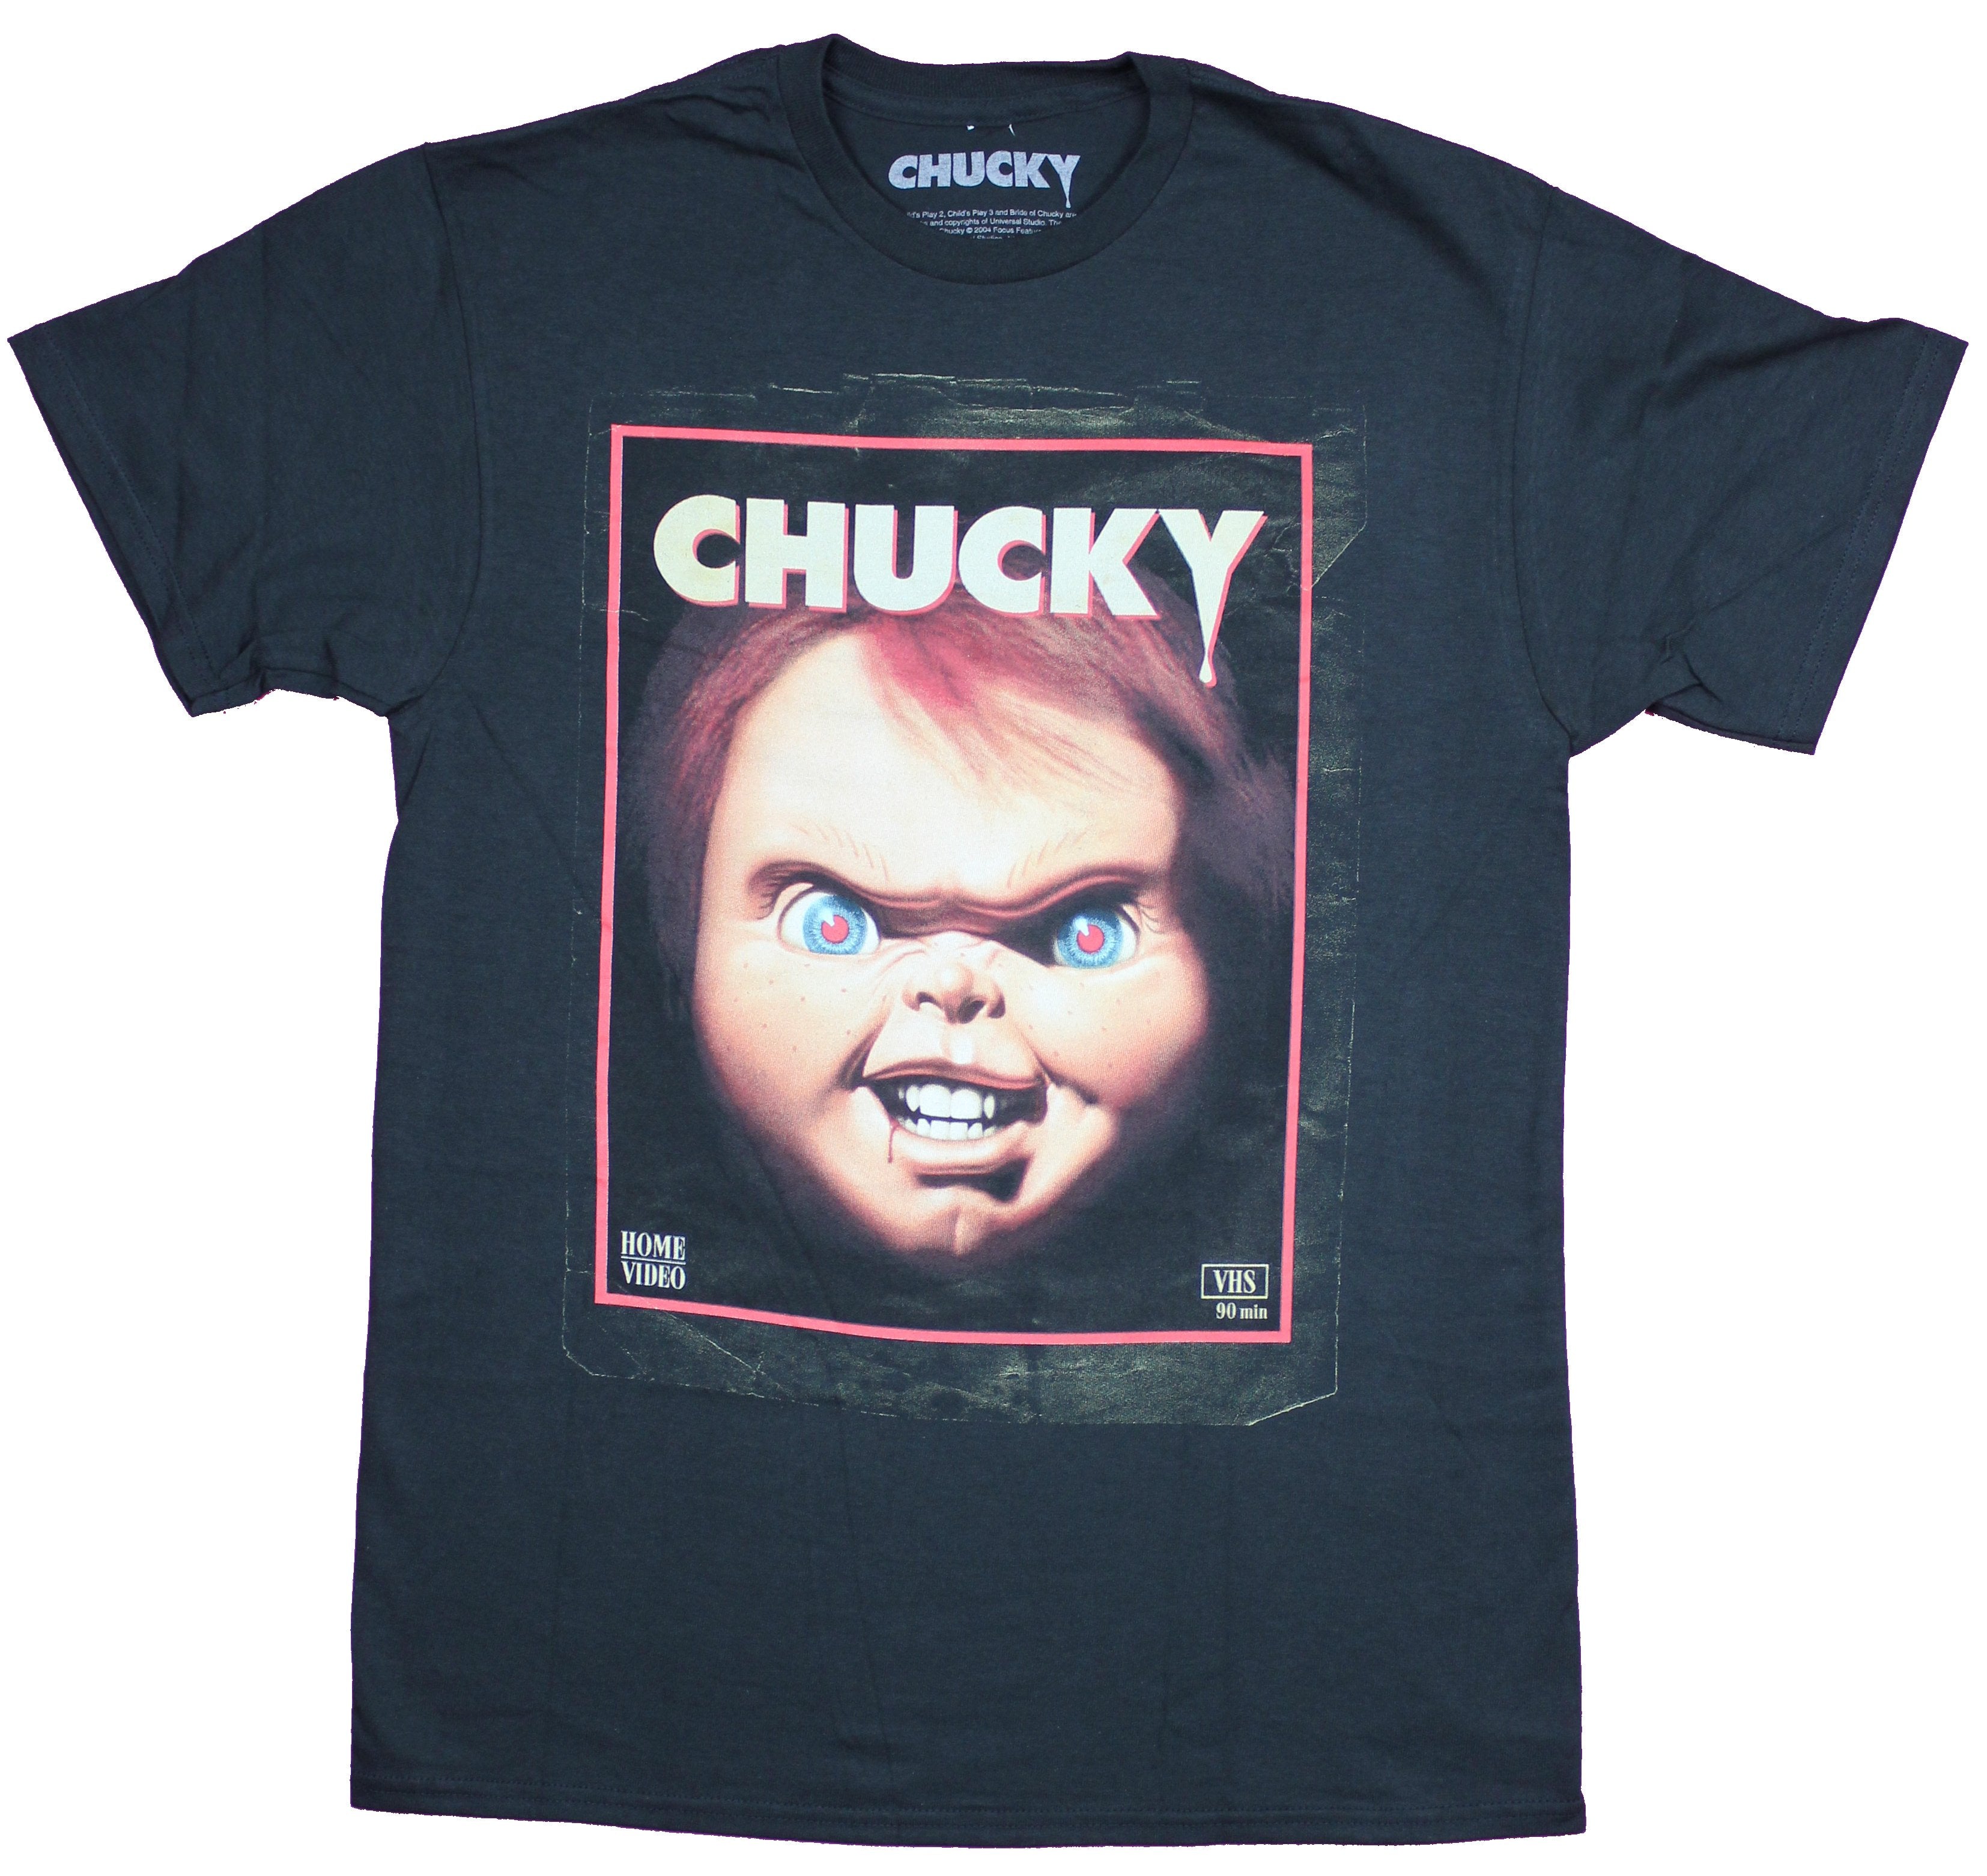 Chucky Mens T-Shirt - Close Up of The Child's Play Star